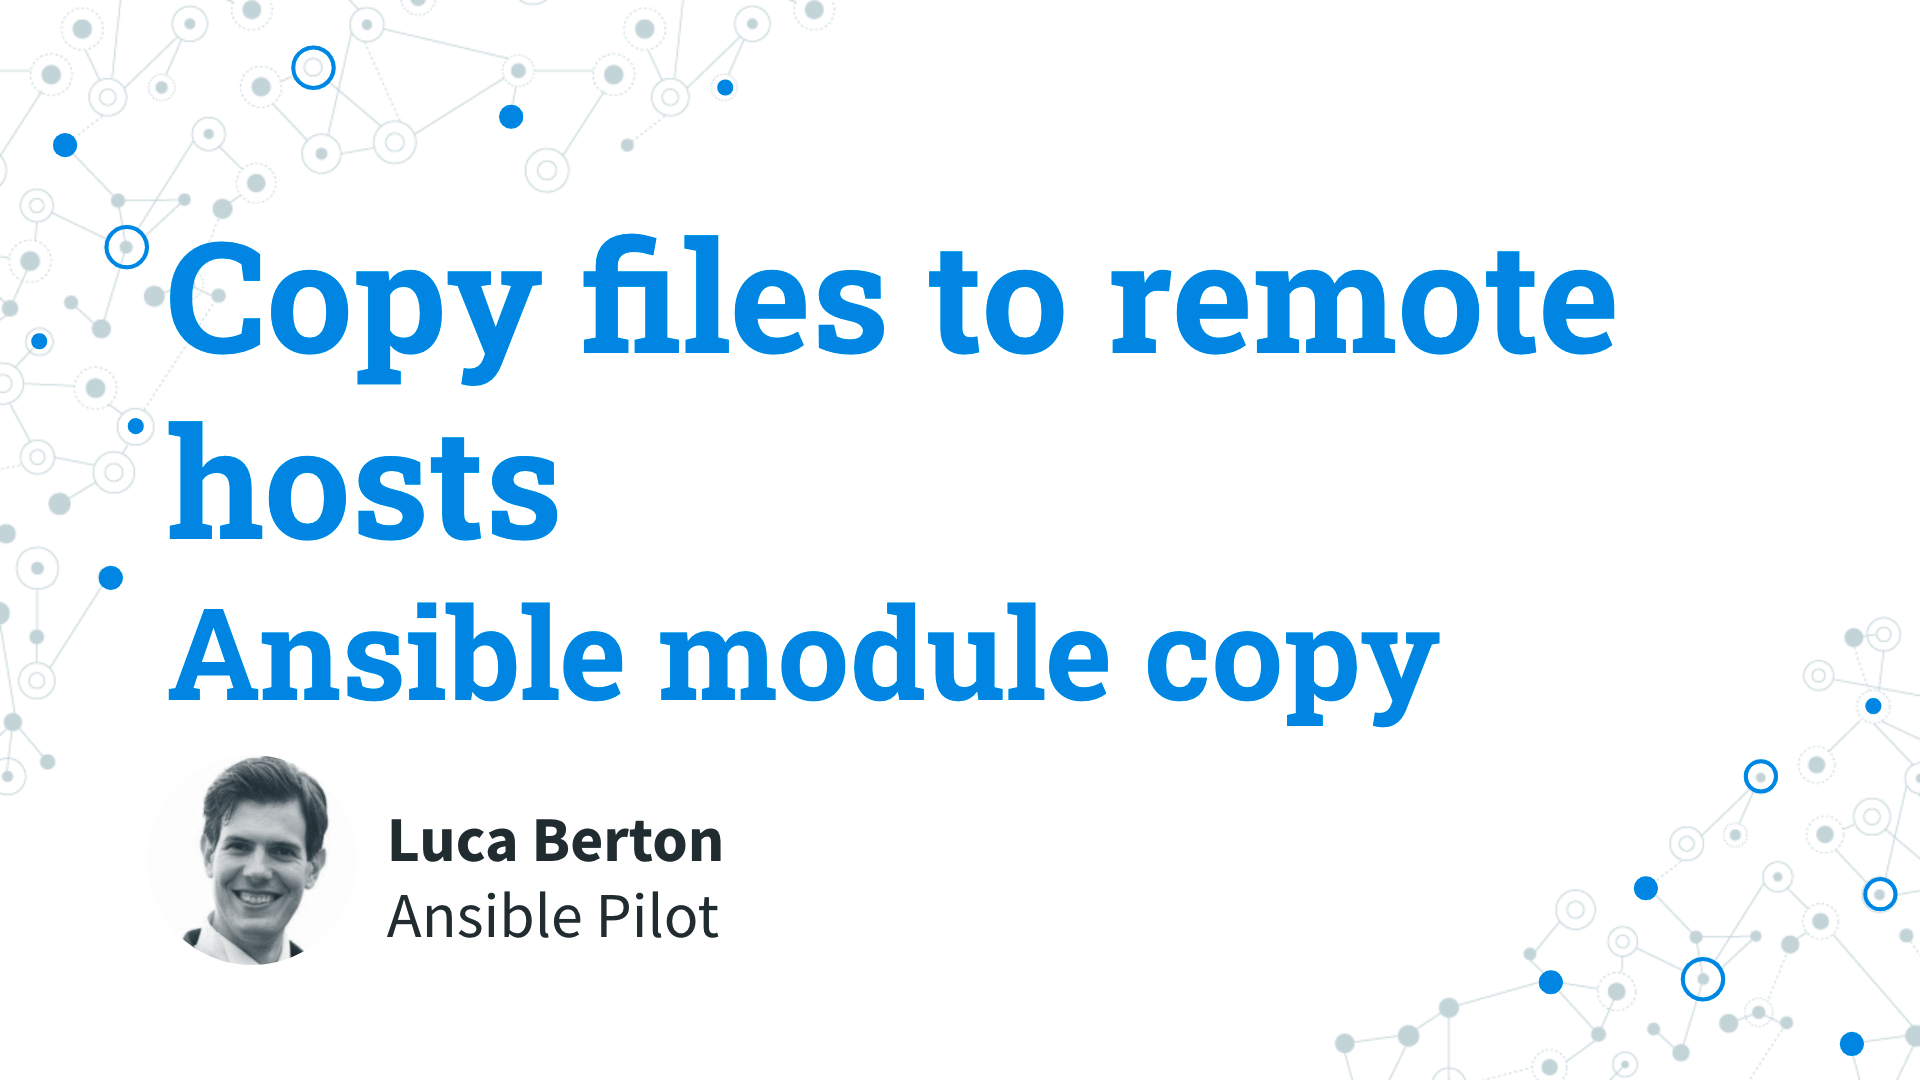 Copy files to remote hosts - Local to Remote - Ansible module copy